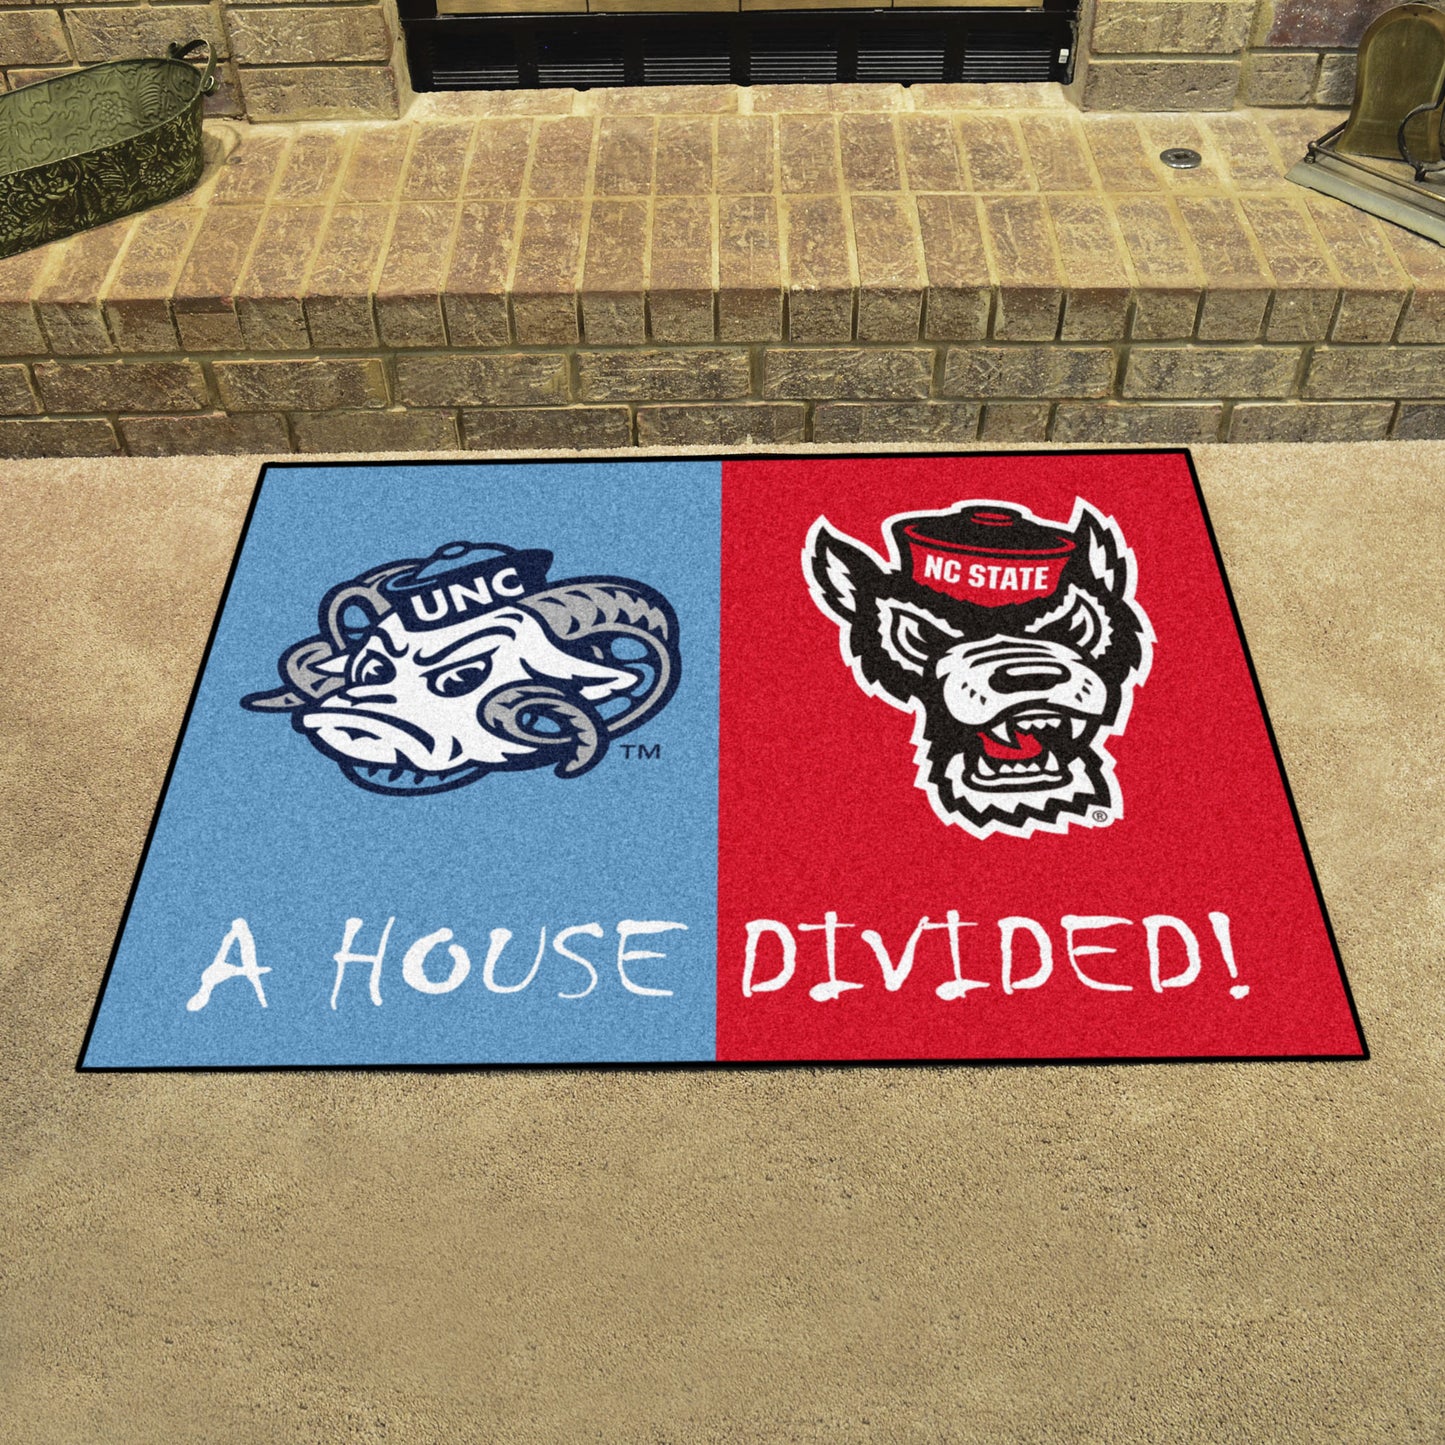 North Carolina Tar Heels House Divided Mat with House Divided by Fanmats